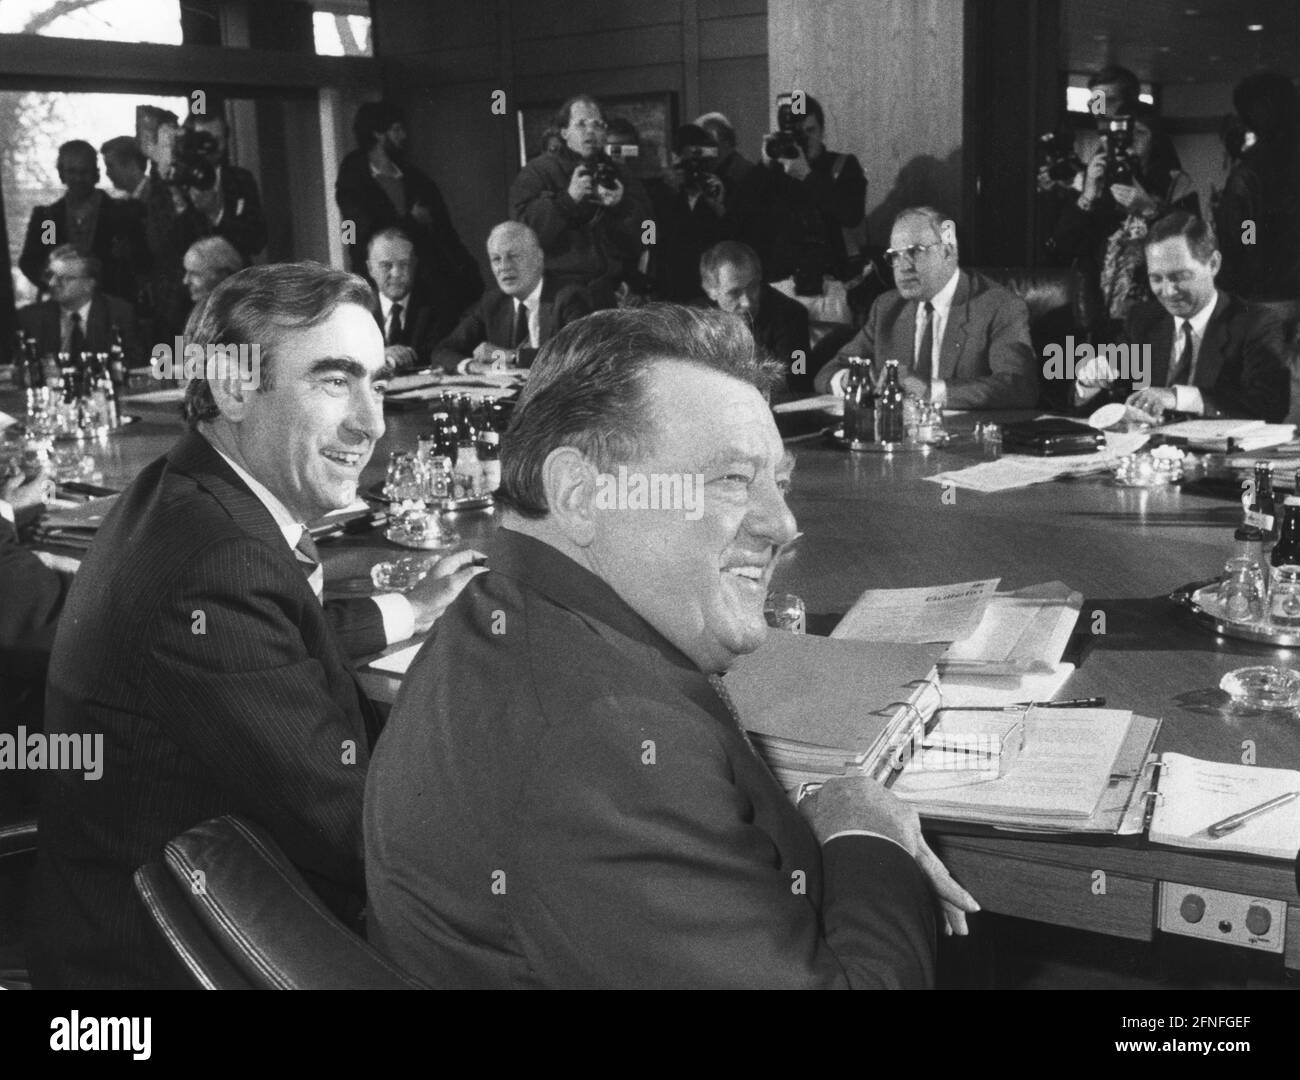 CSU state group leader Theodor Waigel (l.) and Bavarian Prime Minister Franz Josef Strauß (r.) at the coalition negotiations between the CSU and CDU. In the background are Chancellor Helmut Kohl (2nd r. back) and Chancellery Minister Wolfgang Schäuble (r. back). [automated translation] Stock Photo